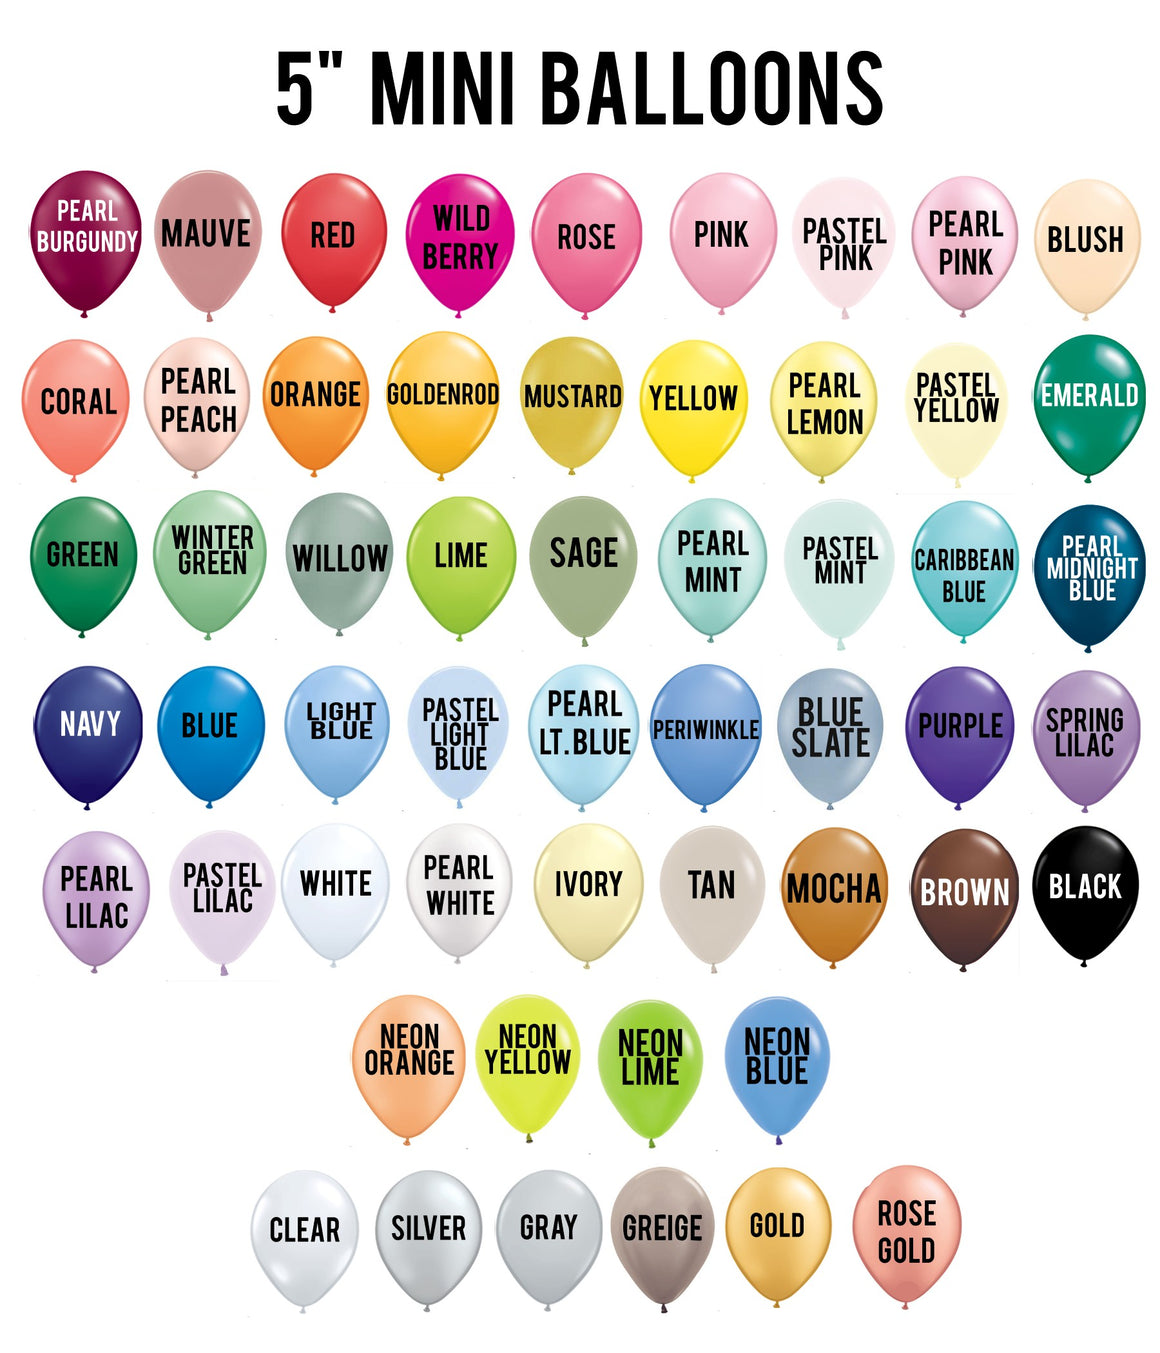 A color chart depicting all of the available colors offered in the 5 inch sized balloons.